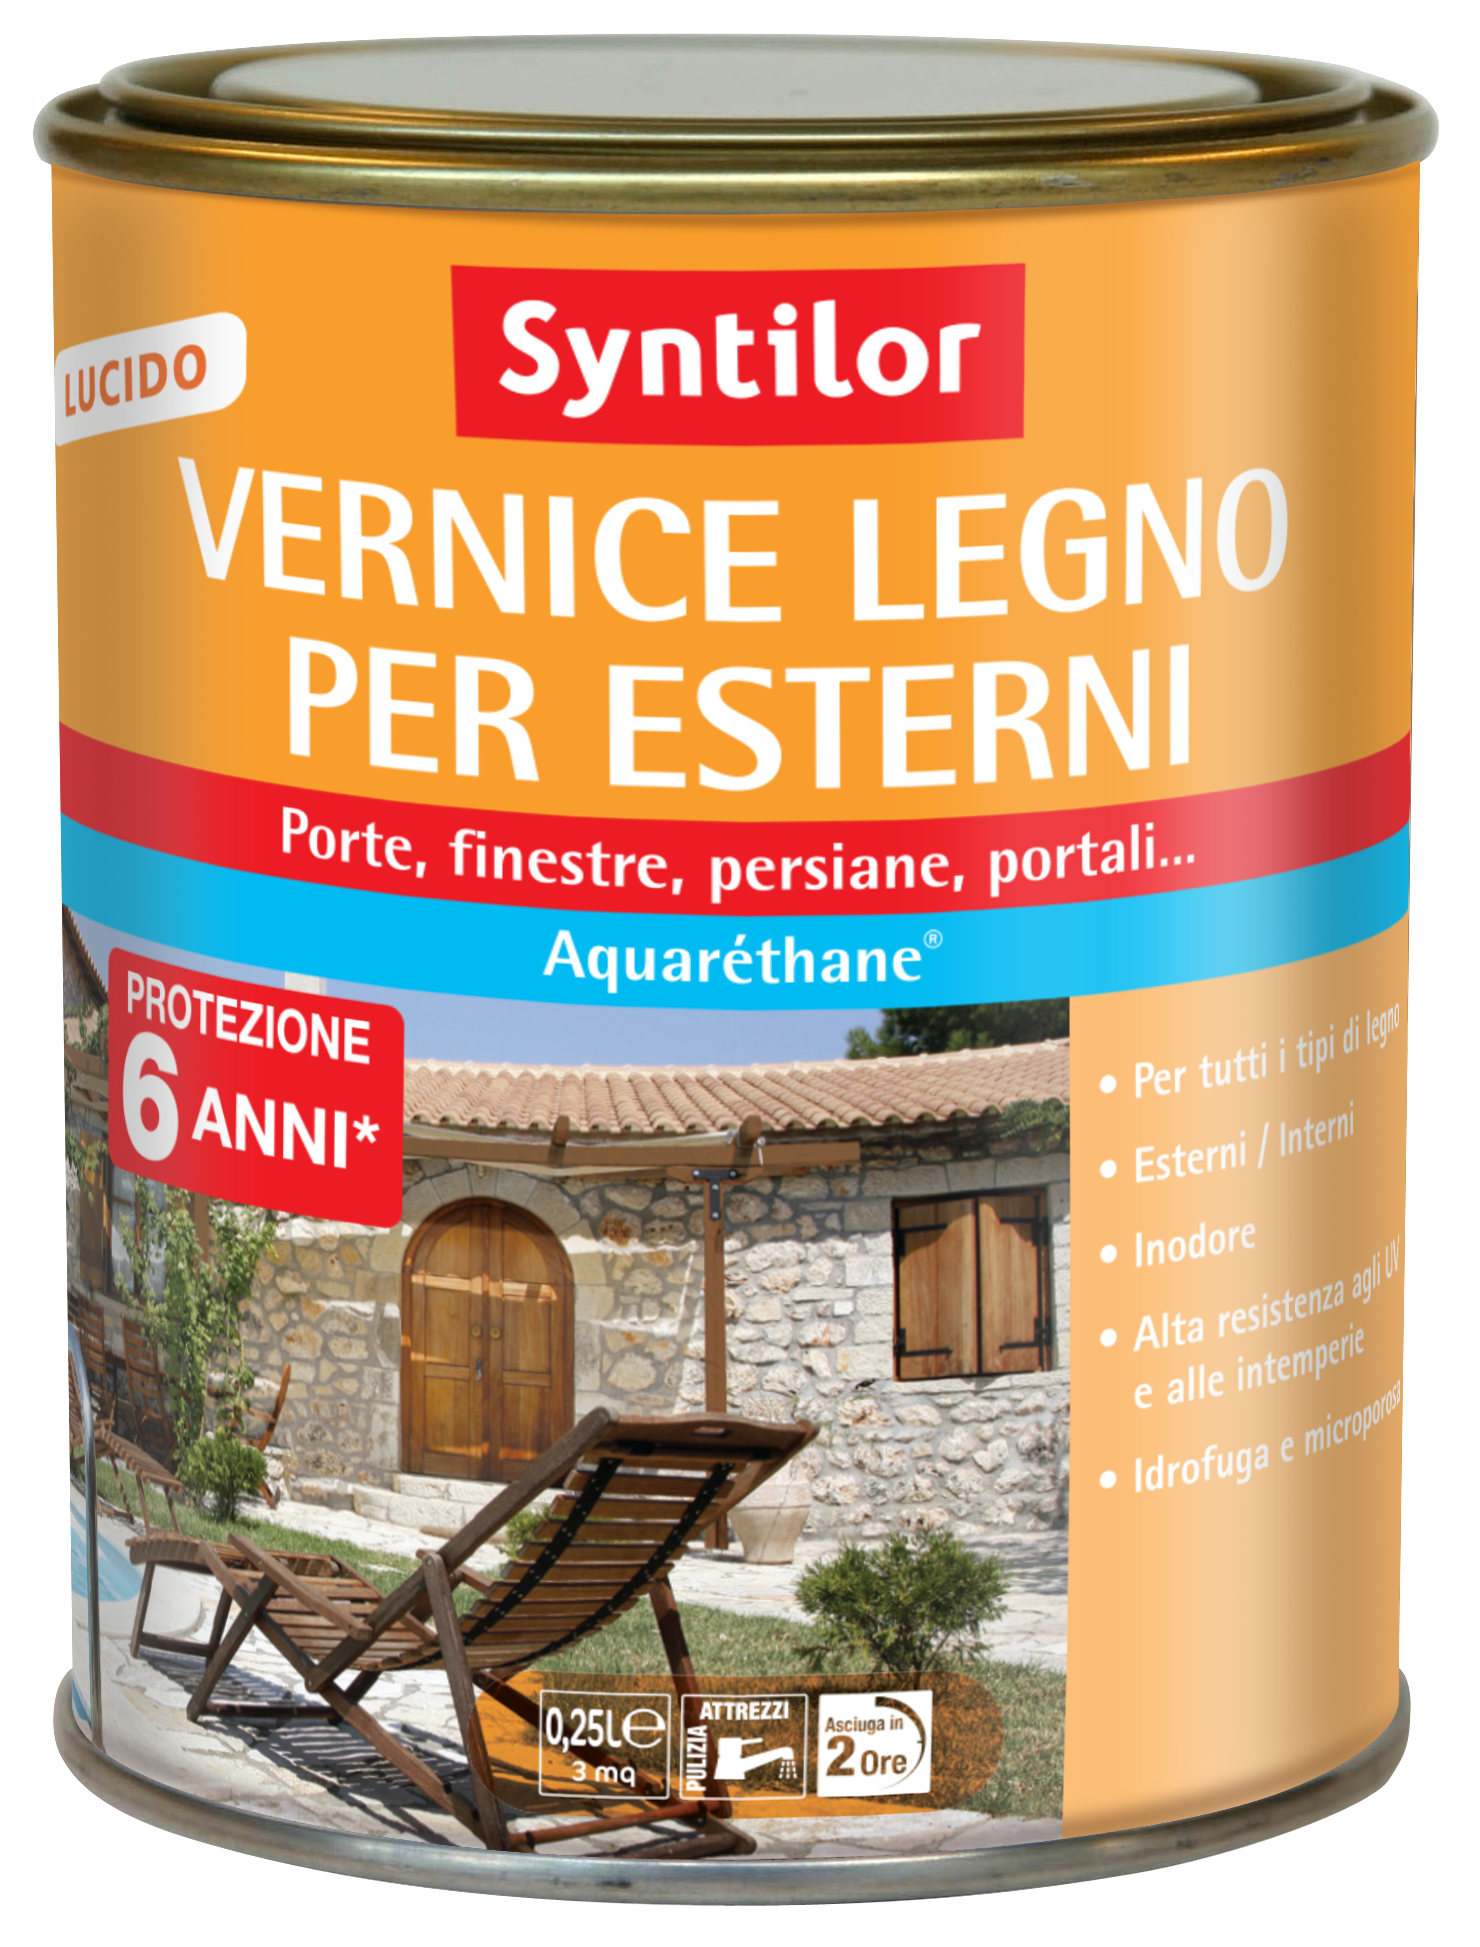 WATER-BASED WOOD PROTECTION PAINT DARK WALNUT HIGH GLOSS SYNTILOR 250M